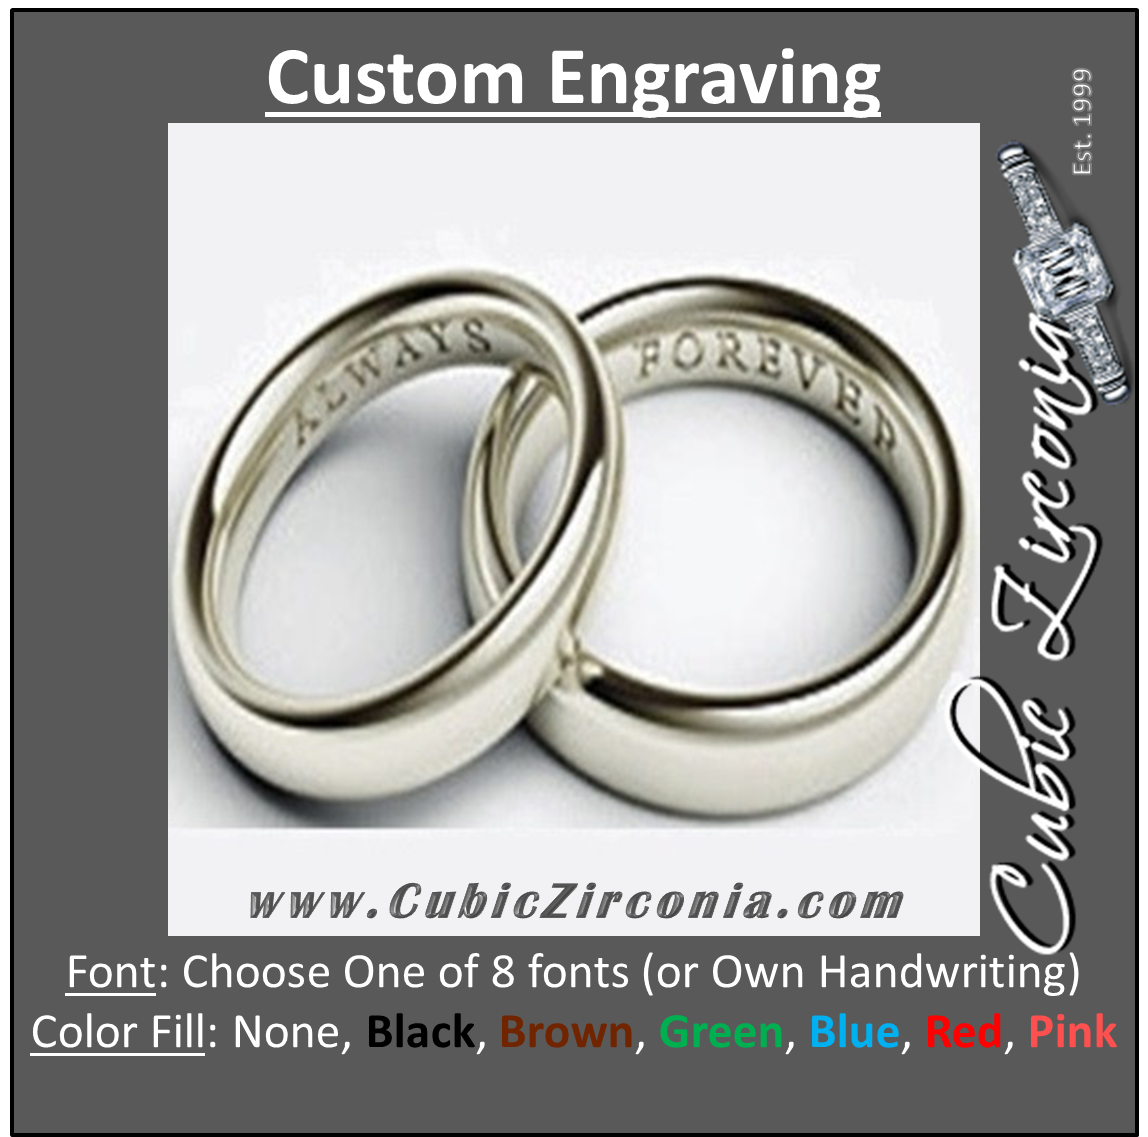 Brushed Stainless Steel Wide Band Custom Engraved Rings